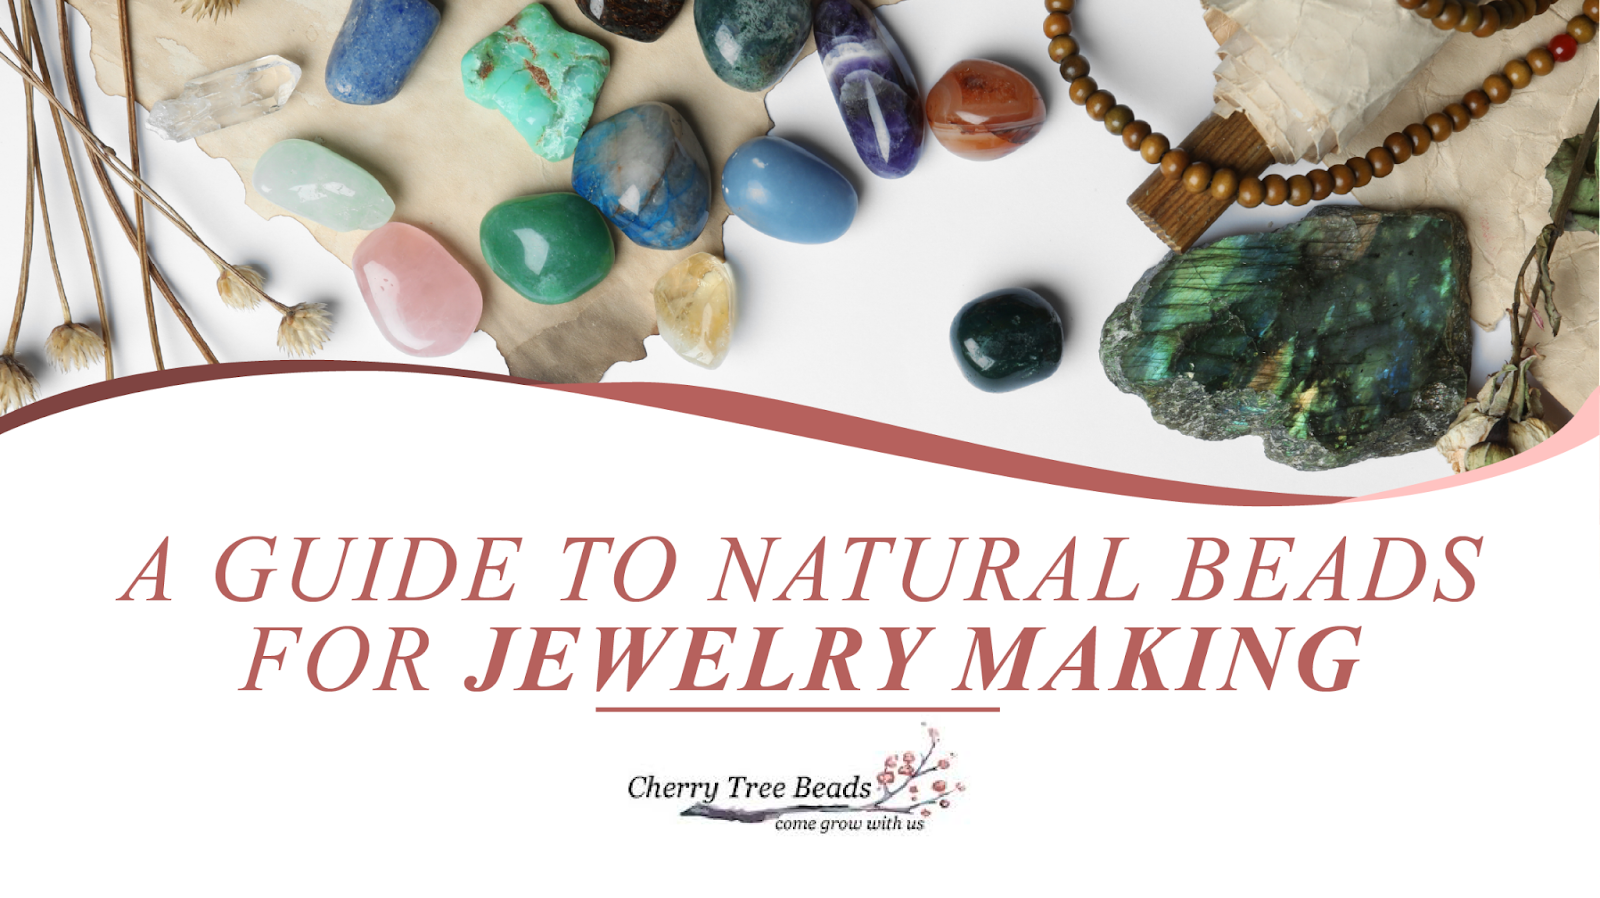 A Guide to Natural Beads for Jewelry Making - Cherry Tree Beads